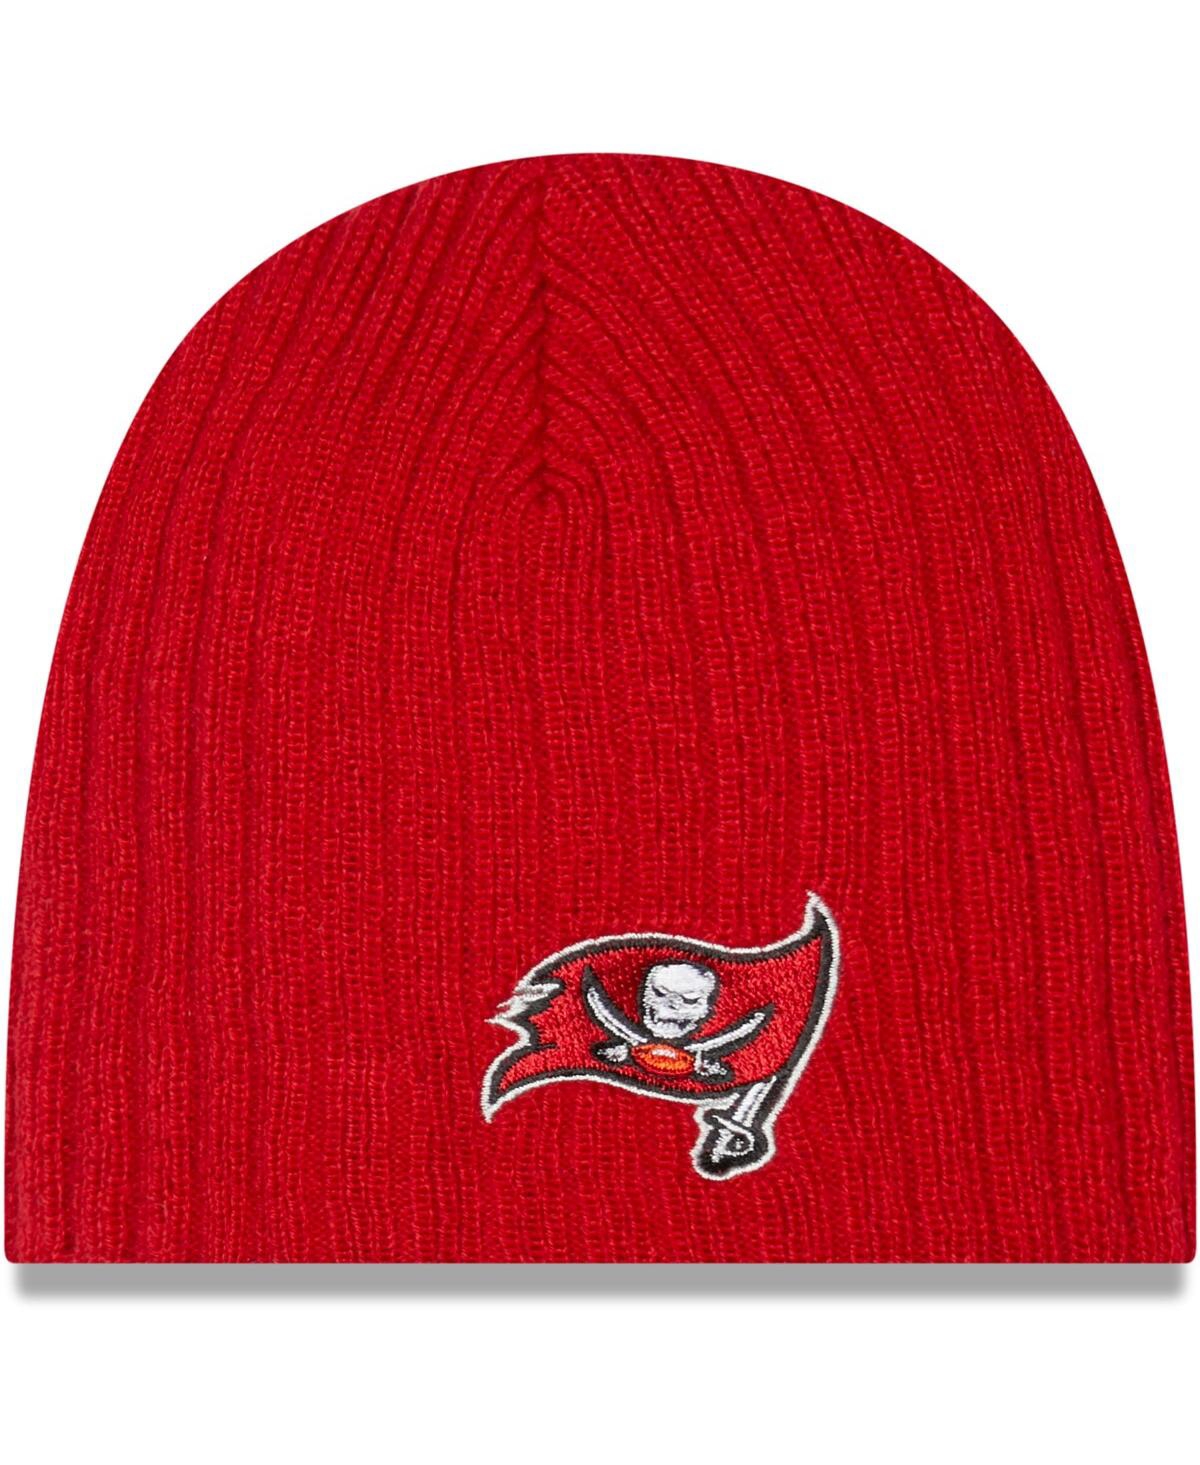 Shop New Era Infant Boys And Girls Red Tampa Bay Buccaneers Mini Fan Beanie